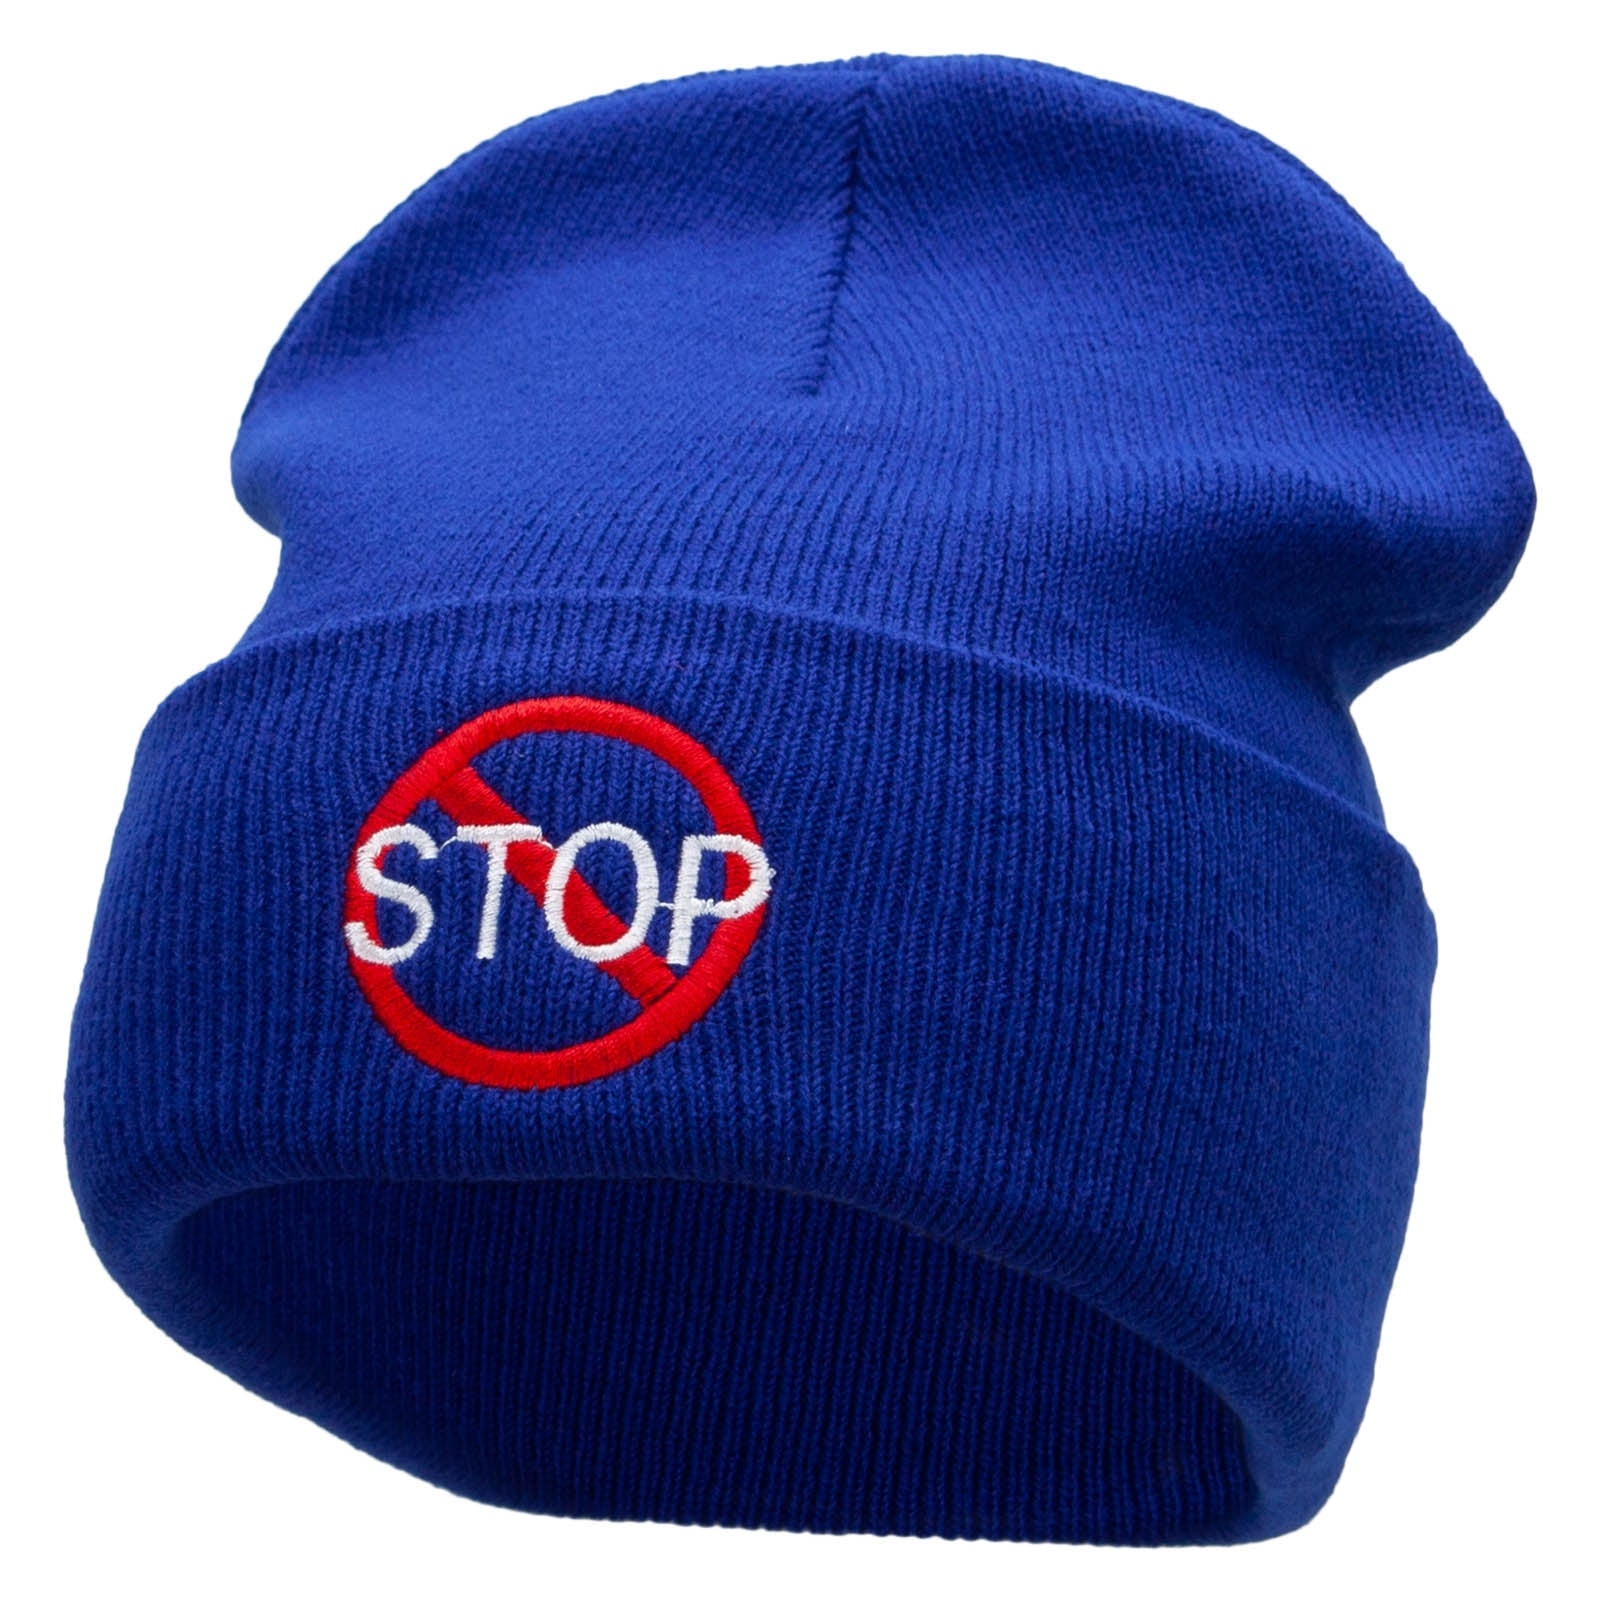 Stop Embroidered 12 Inch Long Knitted Beanie - Royal OSFM